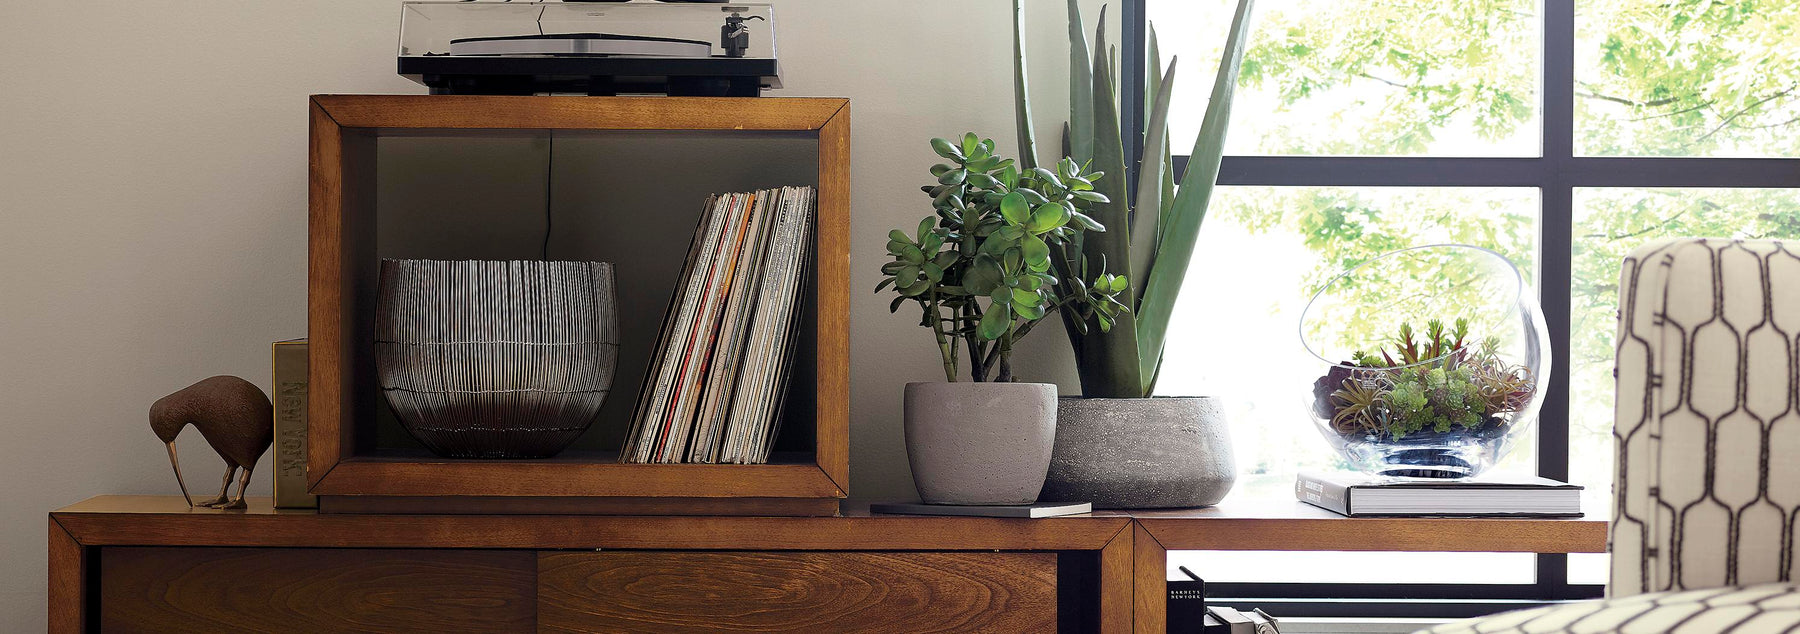 Decorate Your Home With Planters and Botanicals